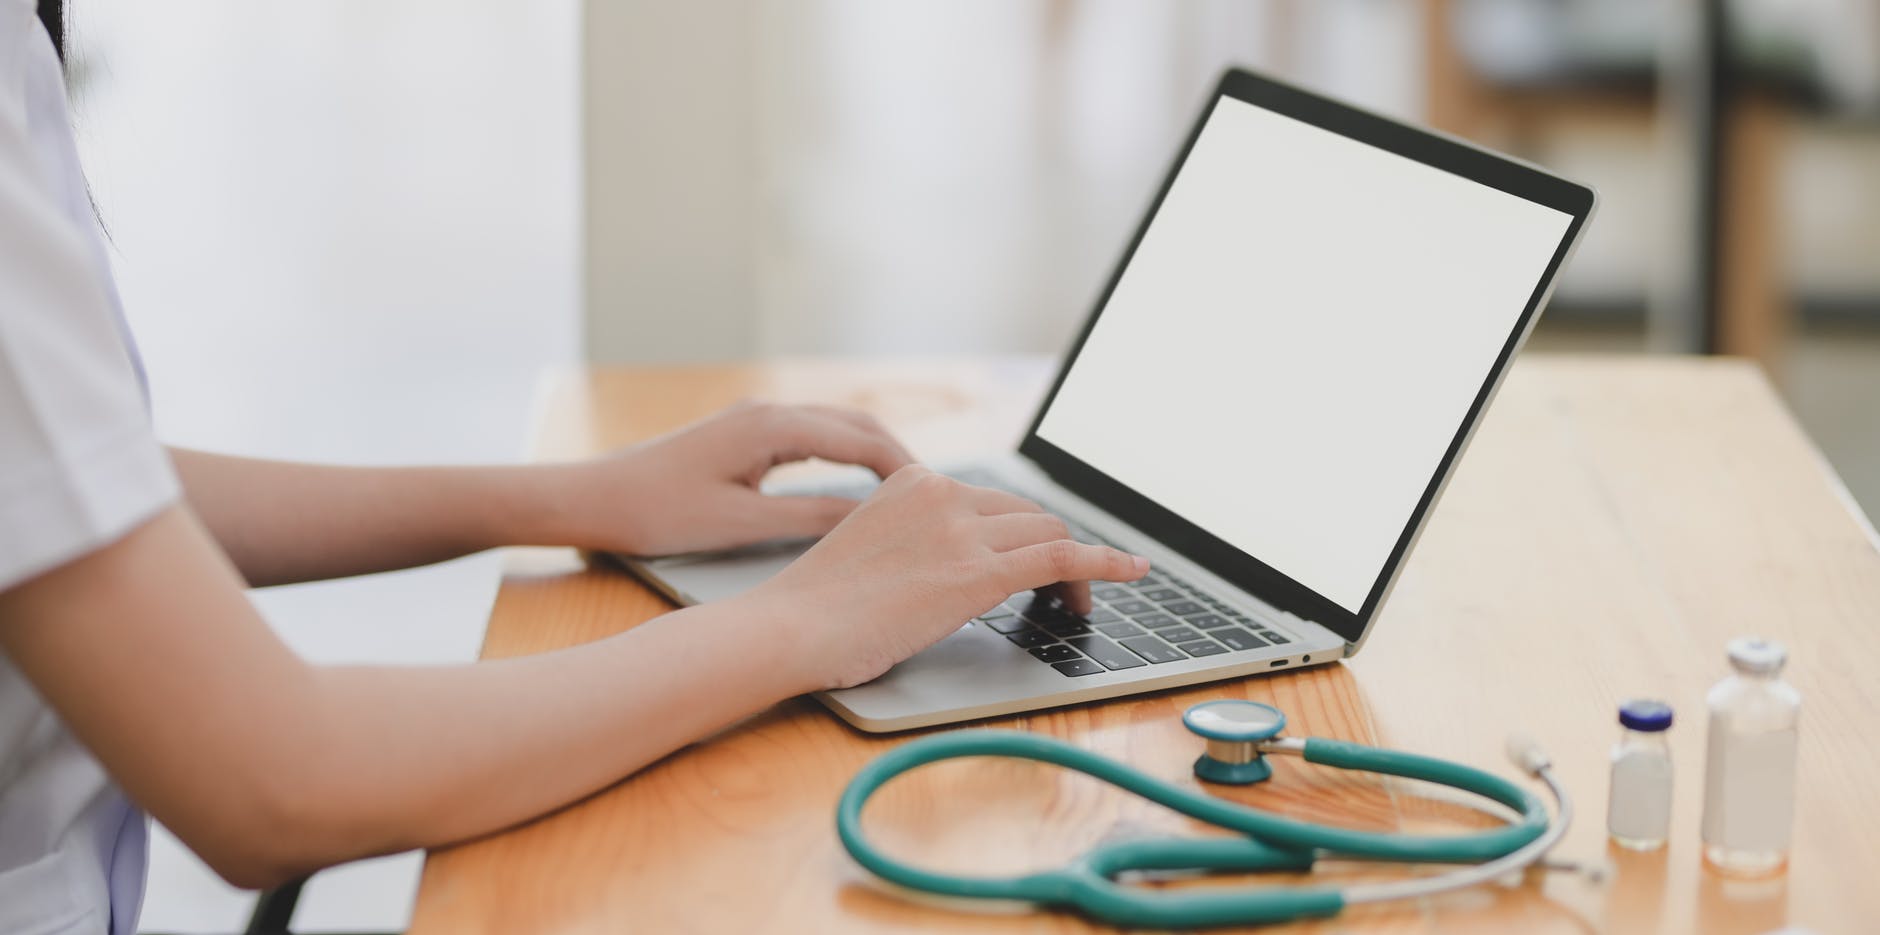 Stethoscope next to a laptop